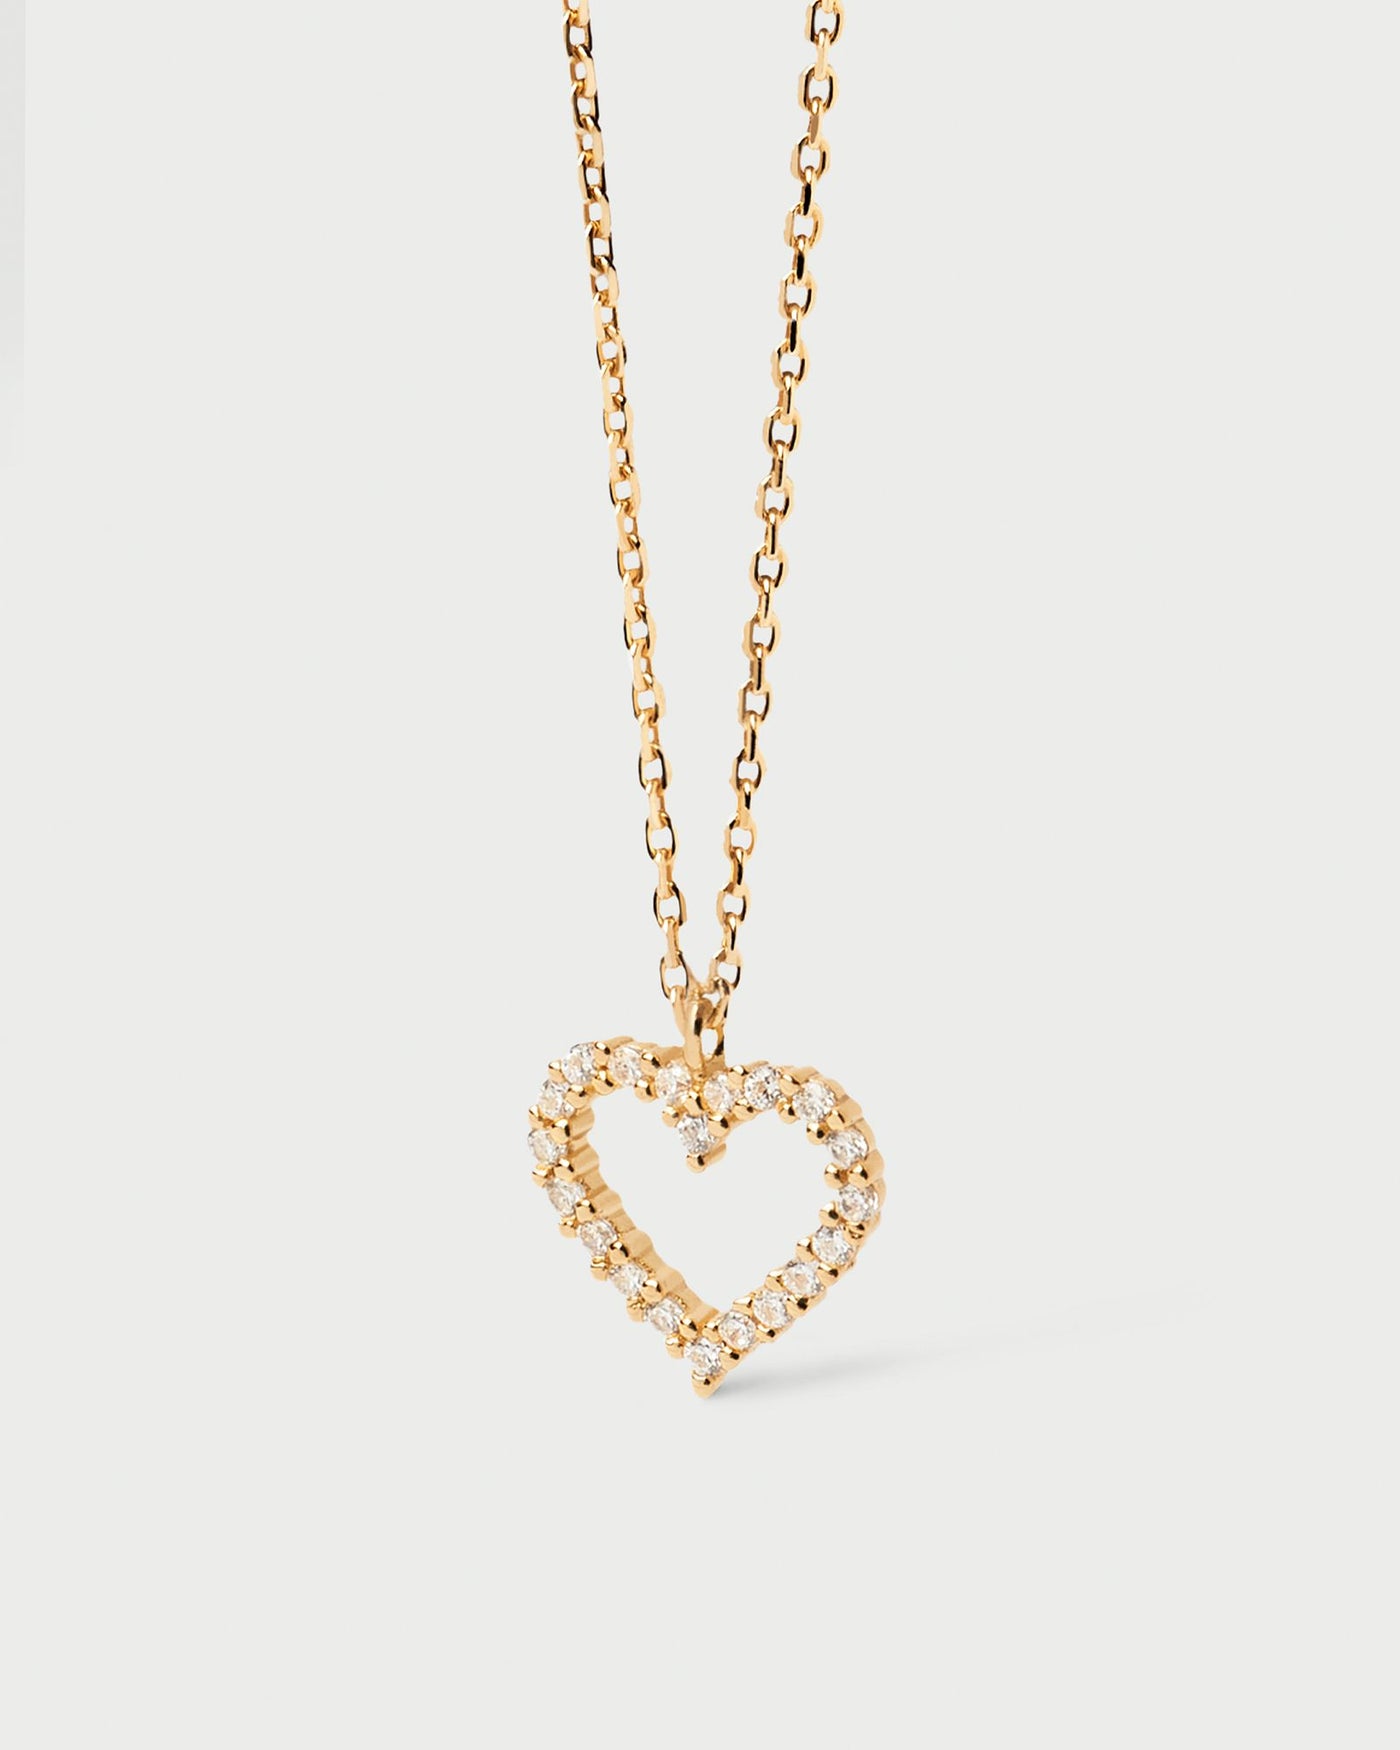 2024 Selection | White Heart Necklace. Heart pendant set with white zirconia stones on a 18k gold plated single link chain necklace. Get the latest arrival from PDPAOLA. Place your order safely and get this Best Seller. Free Shipping.